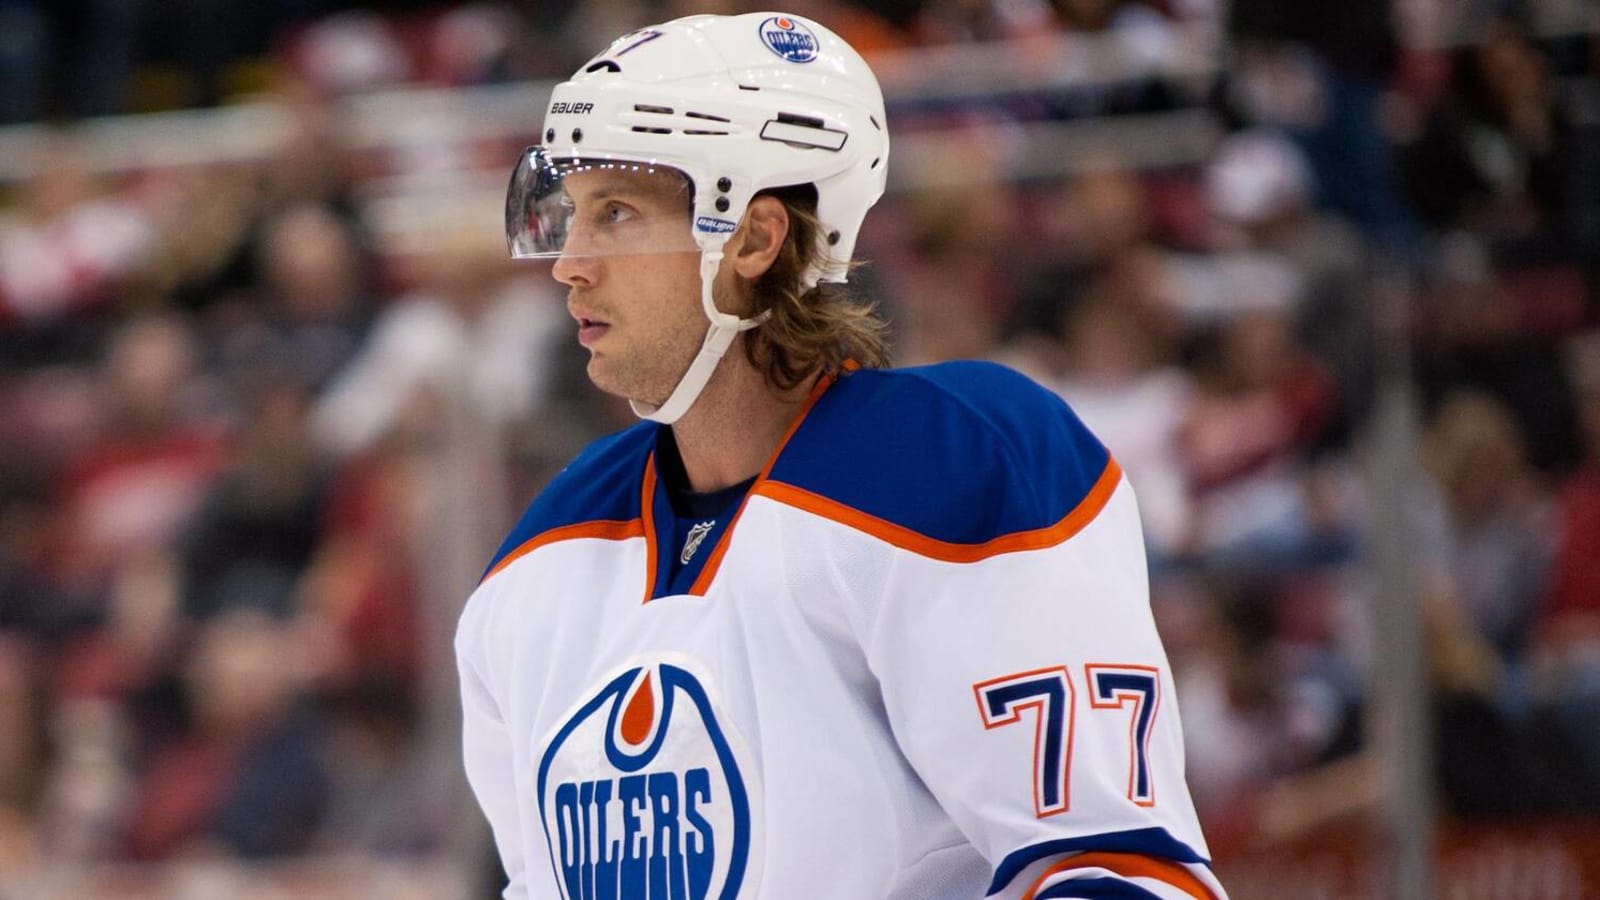 On this day in 2012, the Edmonton Oilers trade Tom Gilbert to the Minnesota Wild for Nick Schultz